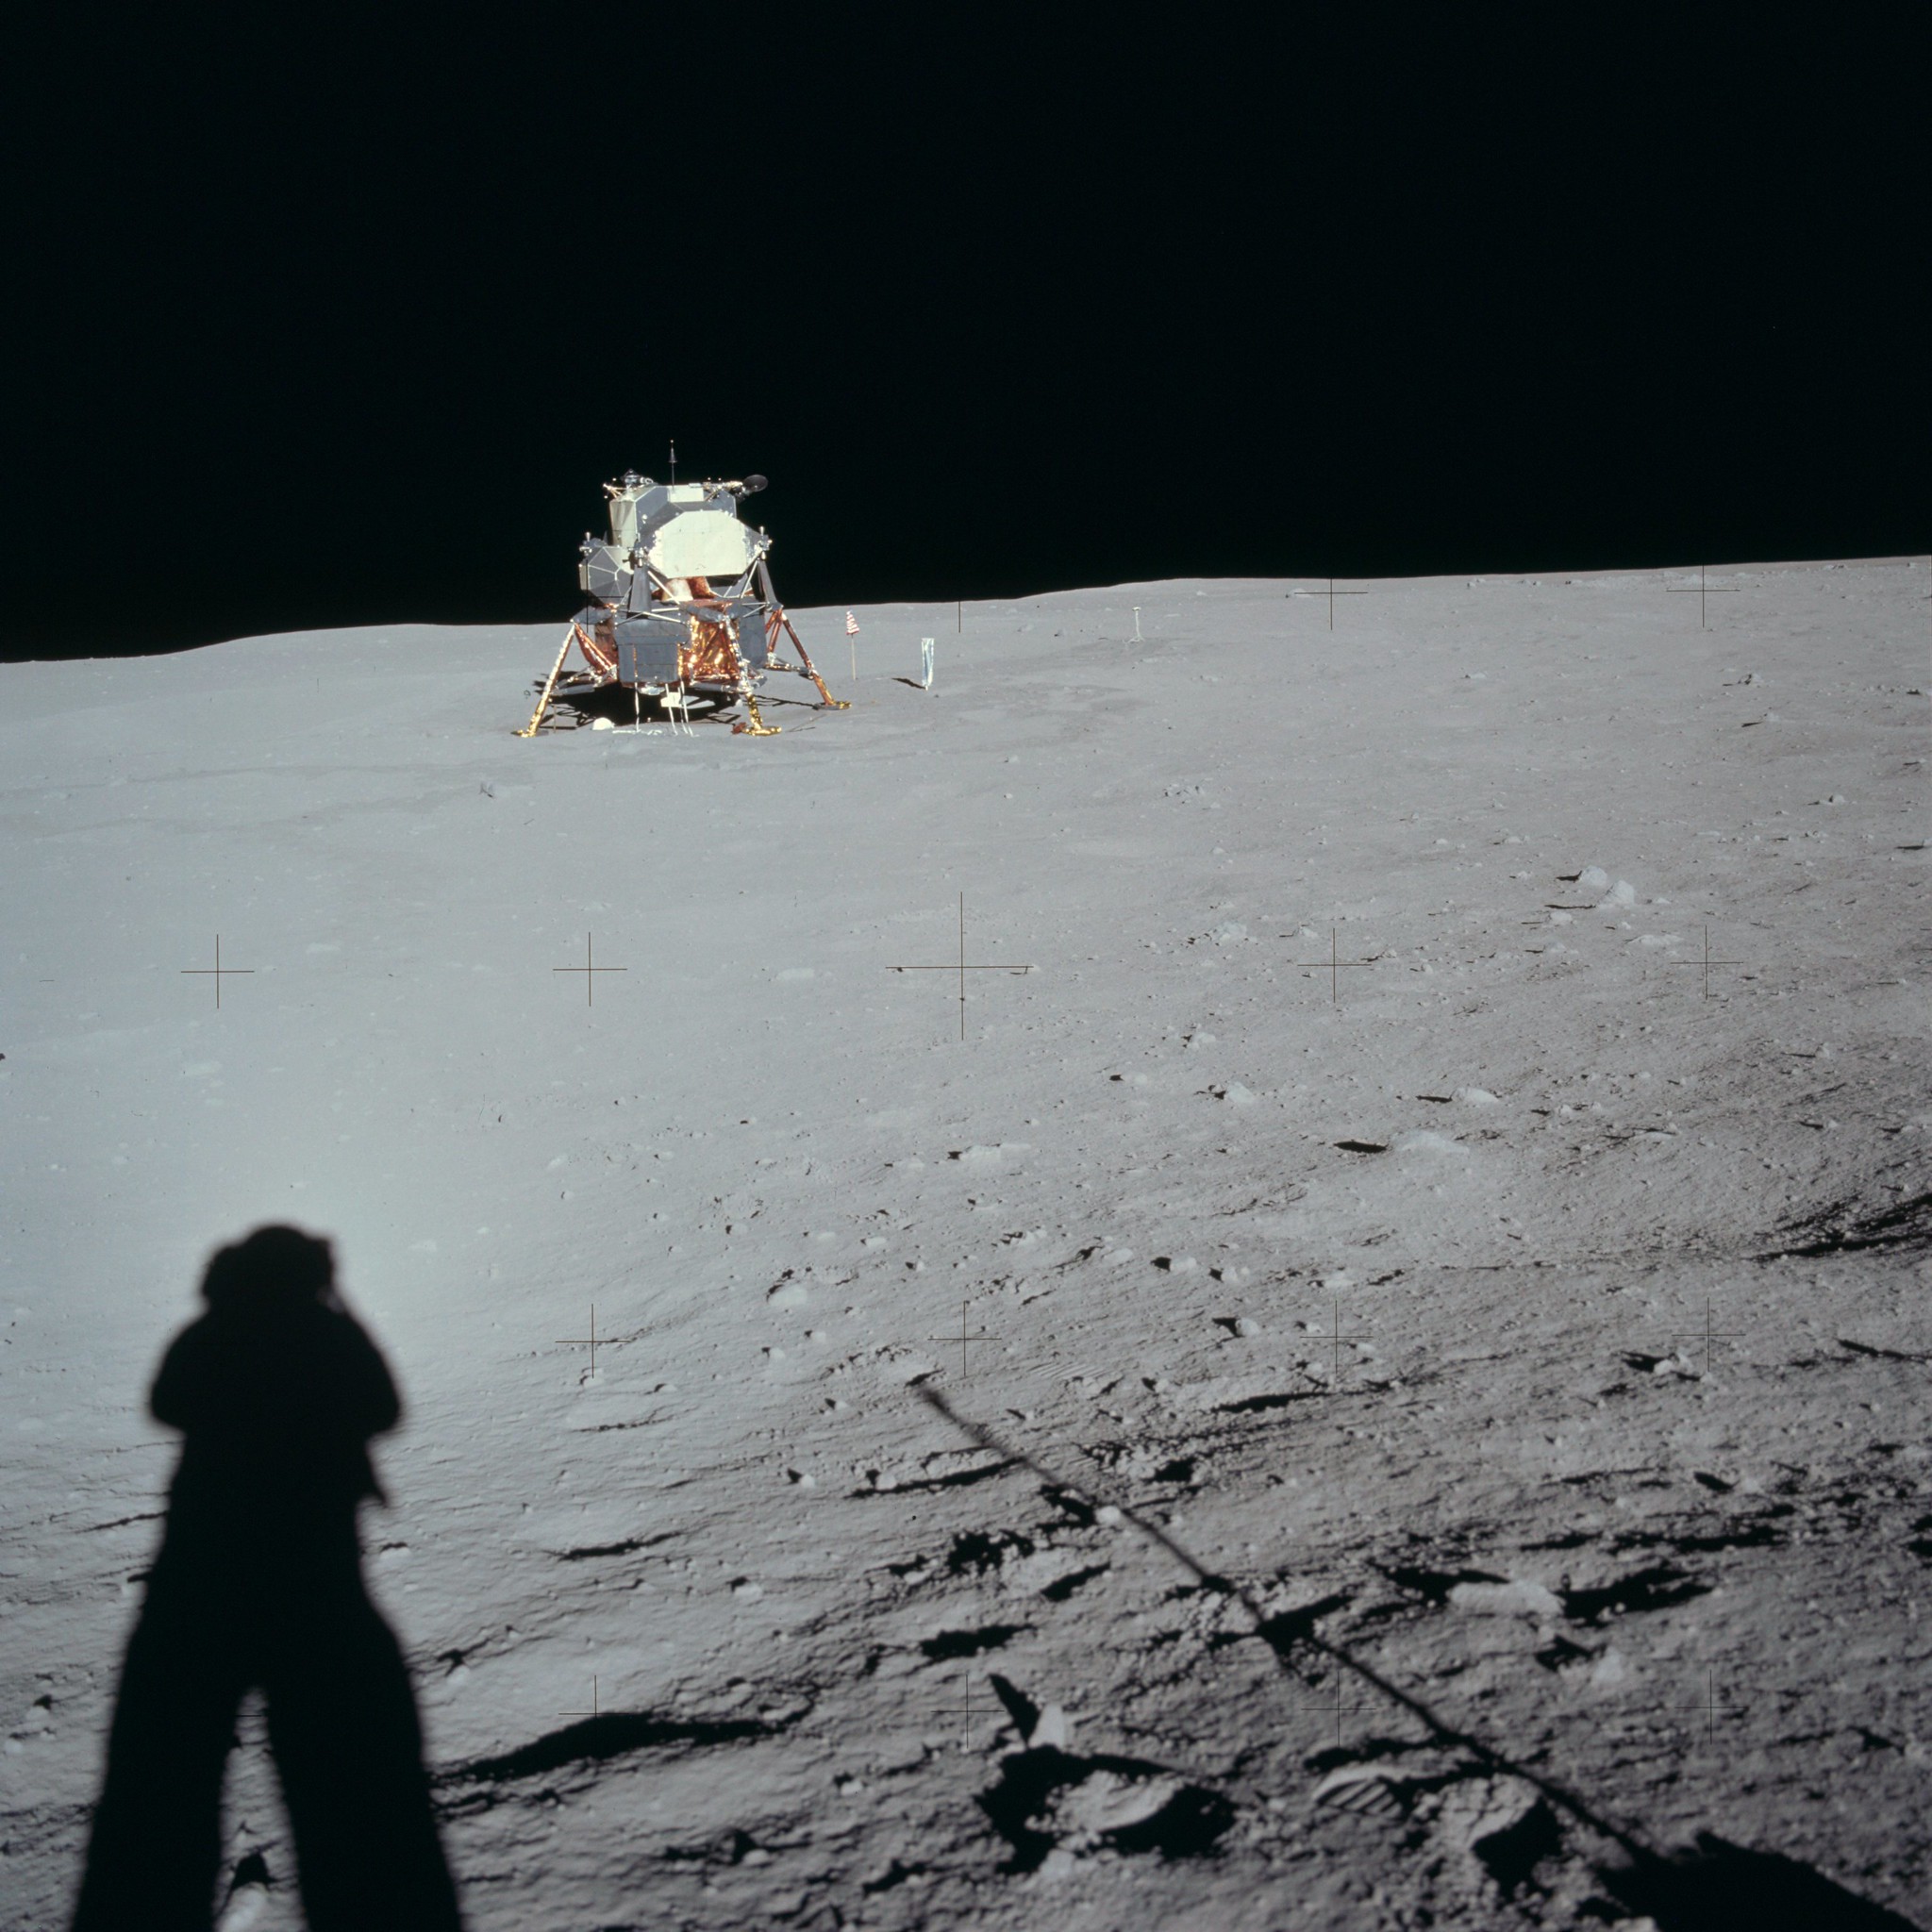 Apollo 11 Mission image - Lunar Module at Tranquility Base